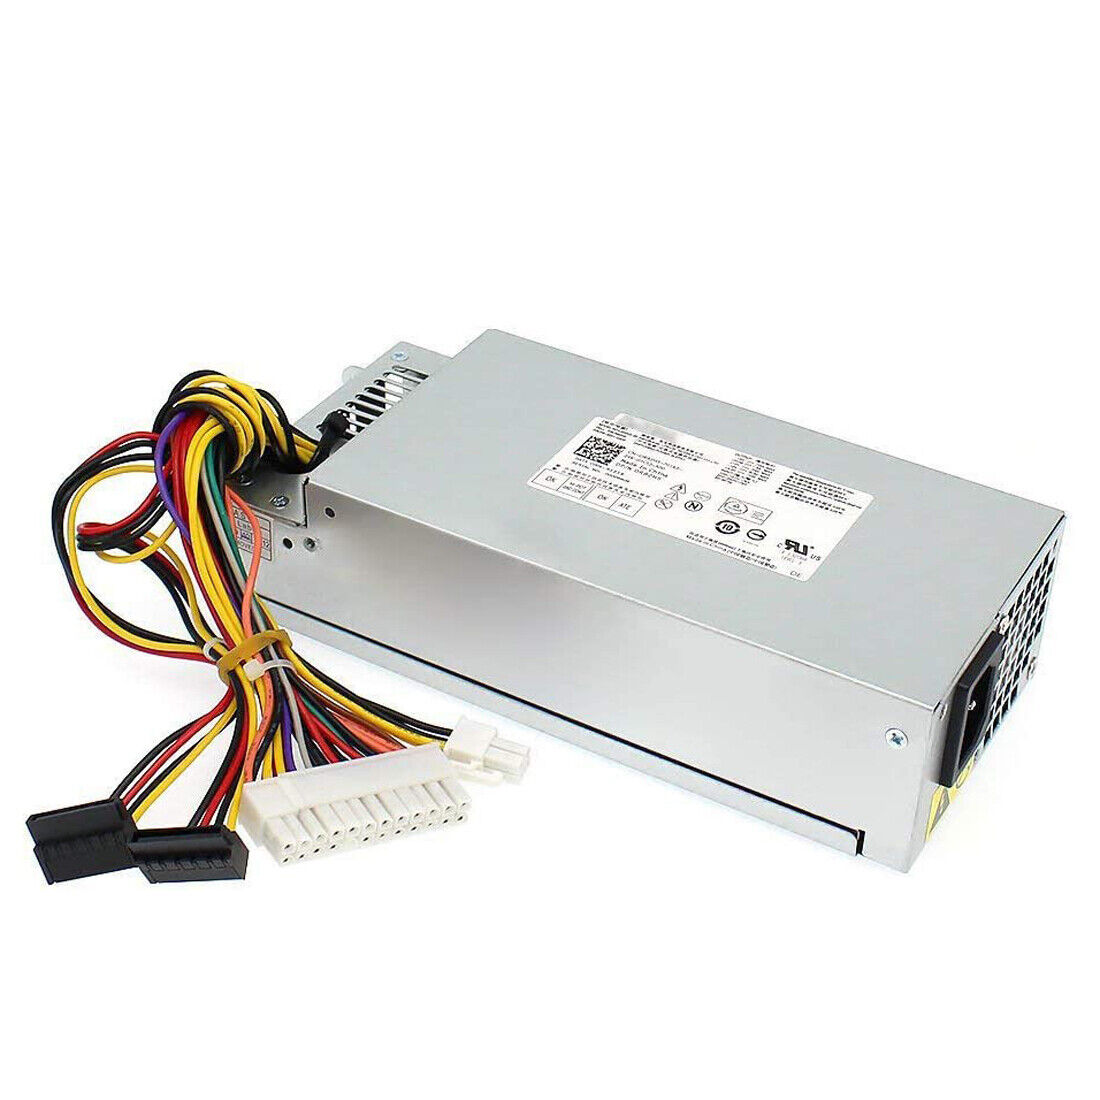 New 650WP 89XW5 R82H5 R5RV4 Power Supply Fits Dell Inspiron 3647 660S 220W